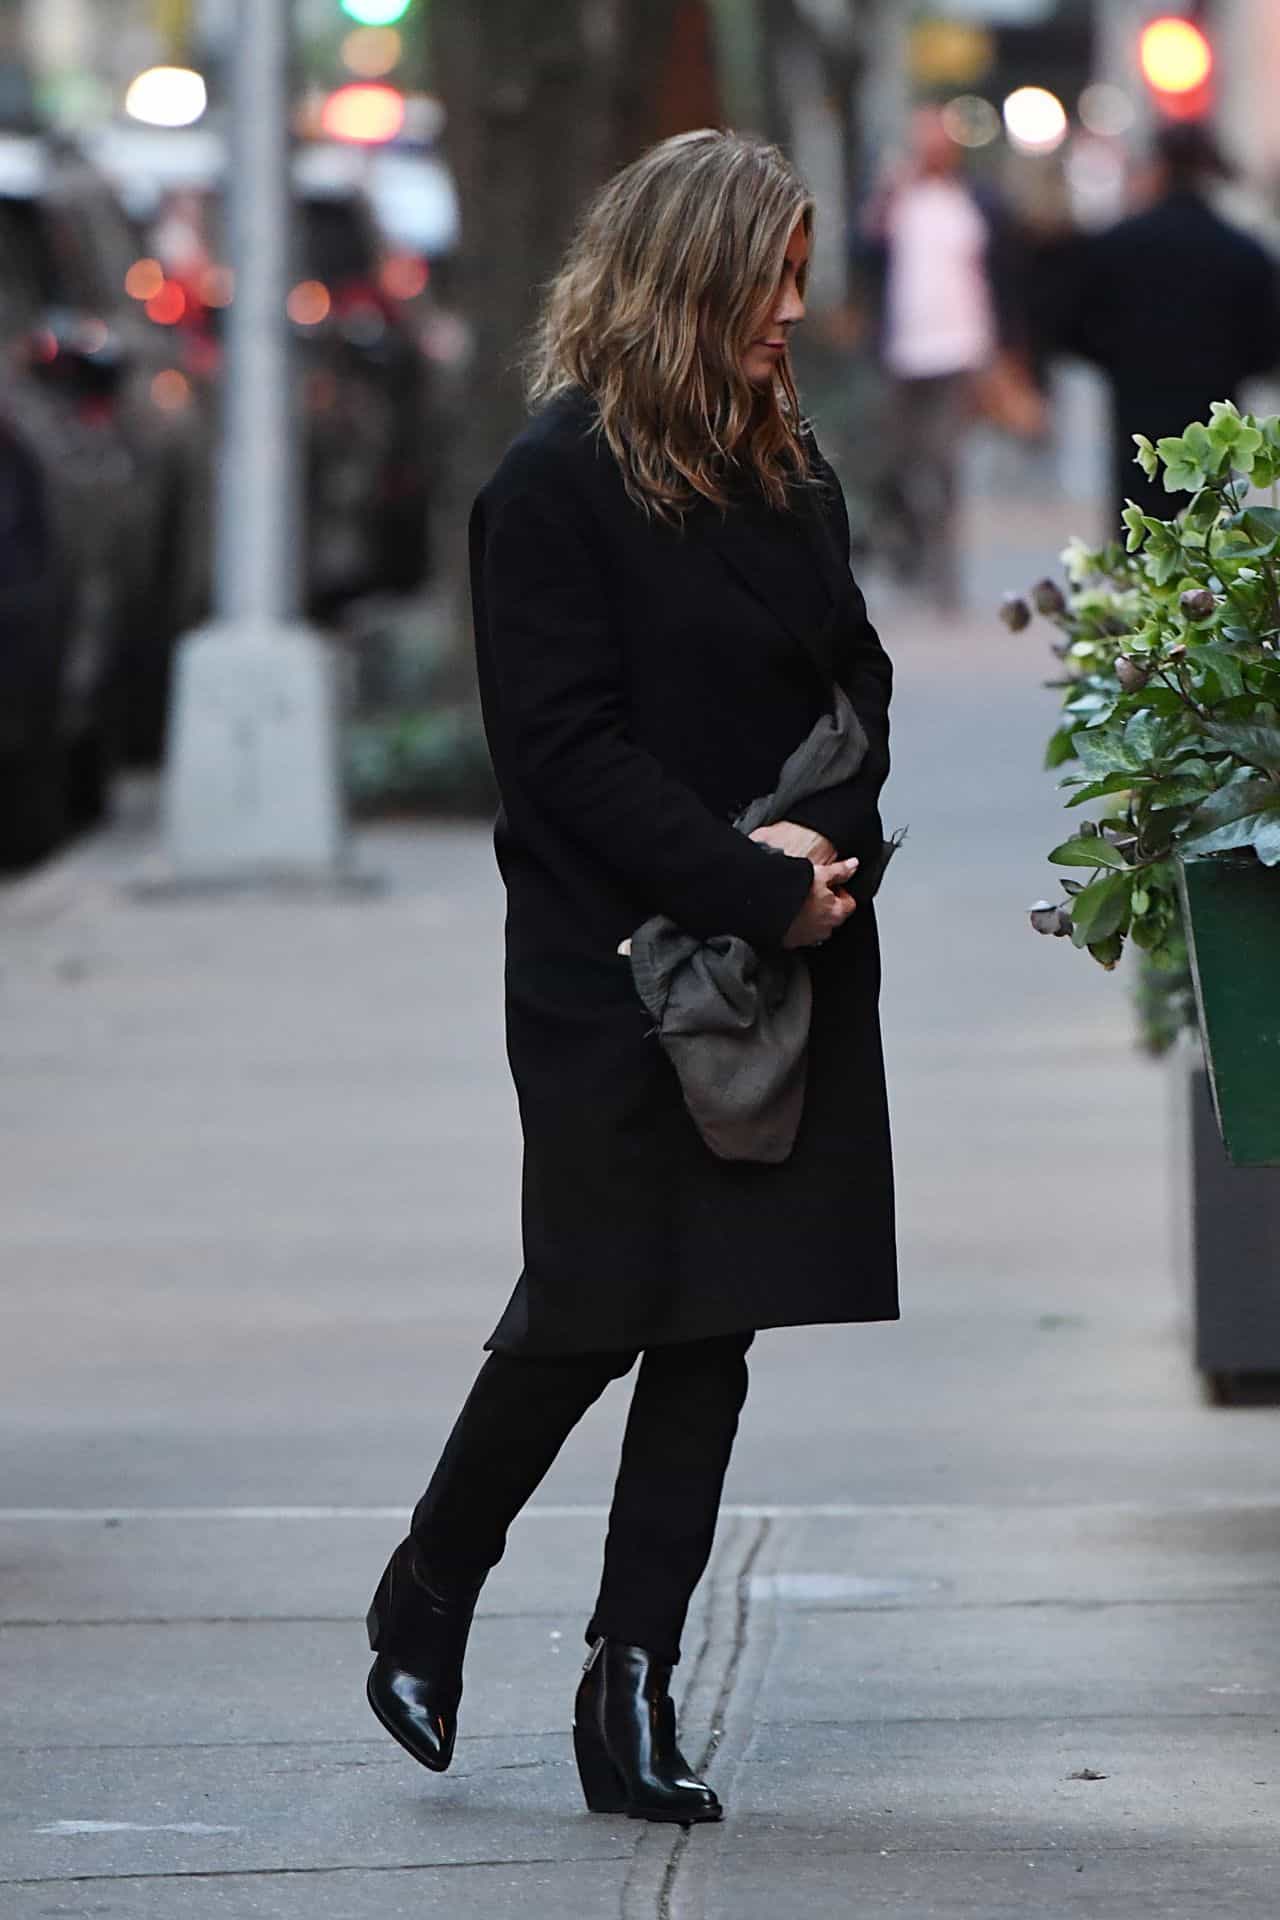 Jennifer Aniston Dazzles in Classy Attire at Dinner Date with Former Spouse